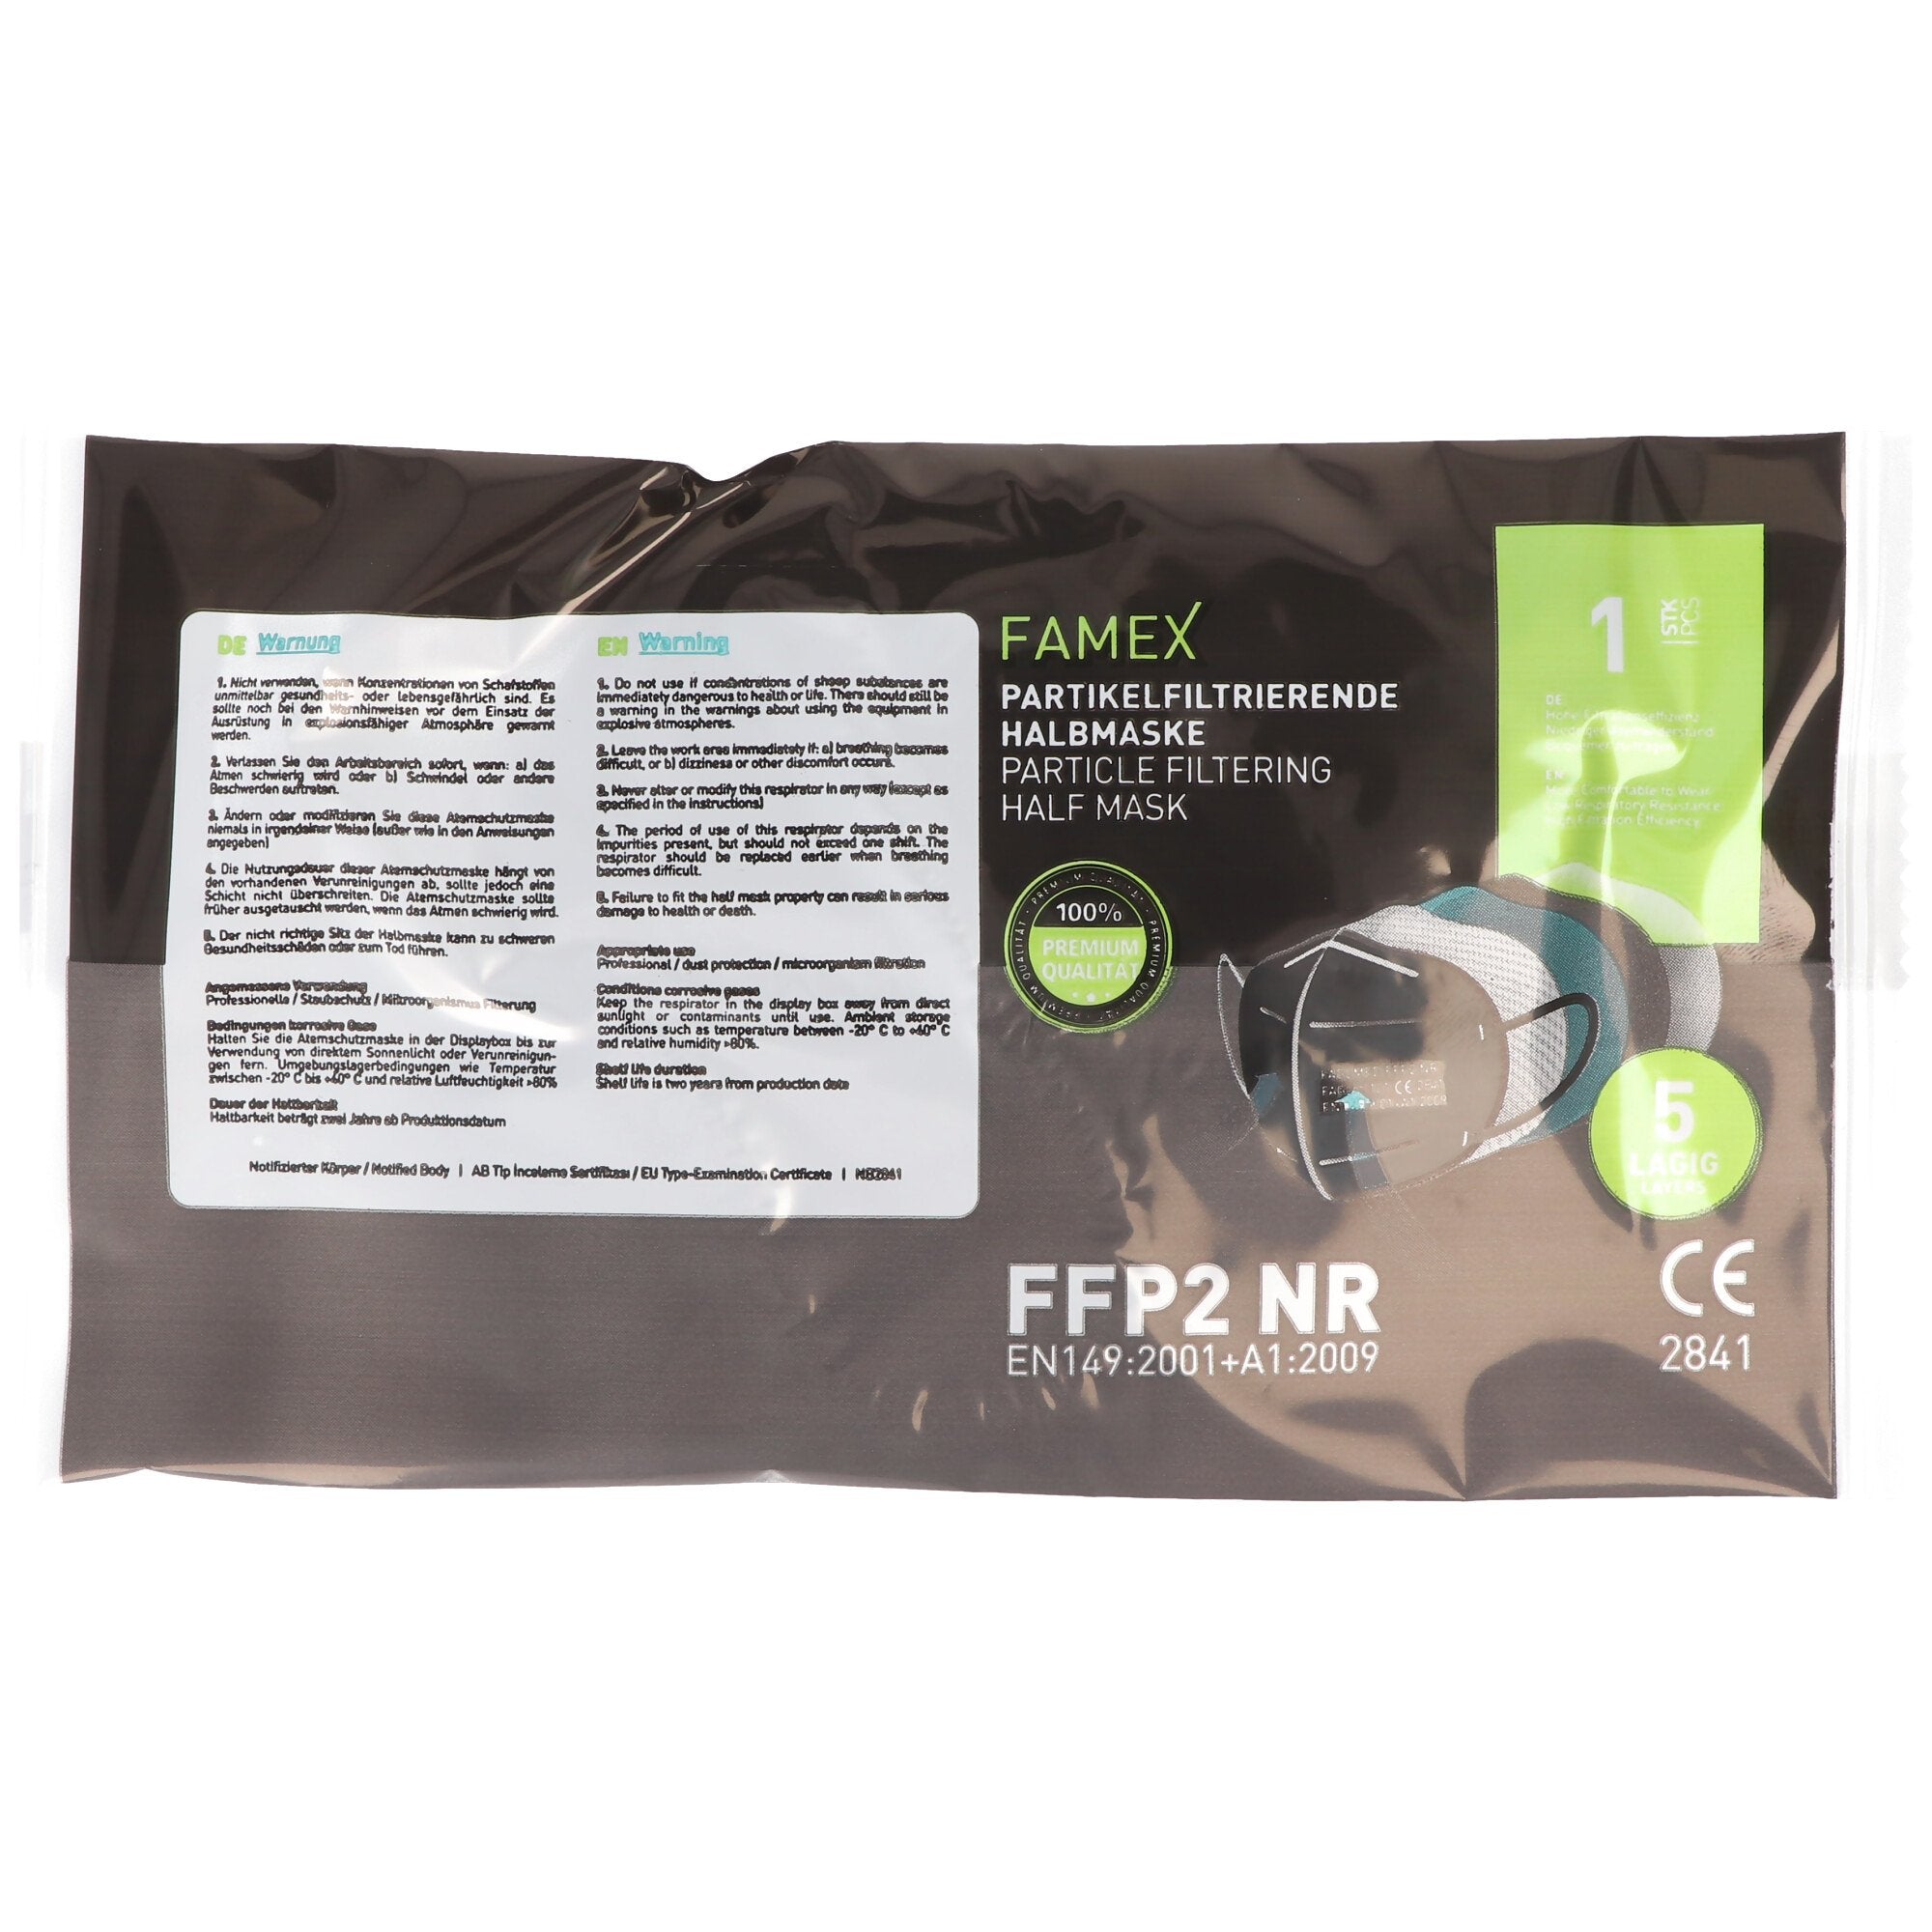 20 pieces FFP2 mask black 5-layer, certified according to DIN EN149: 2001 + A1: 2009, particle filte